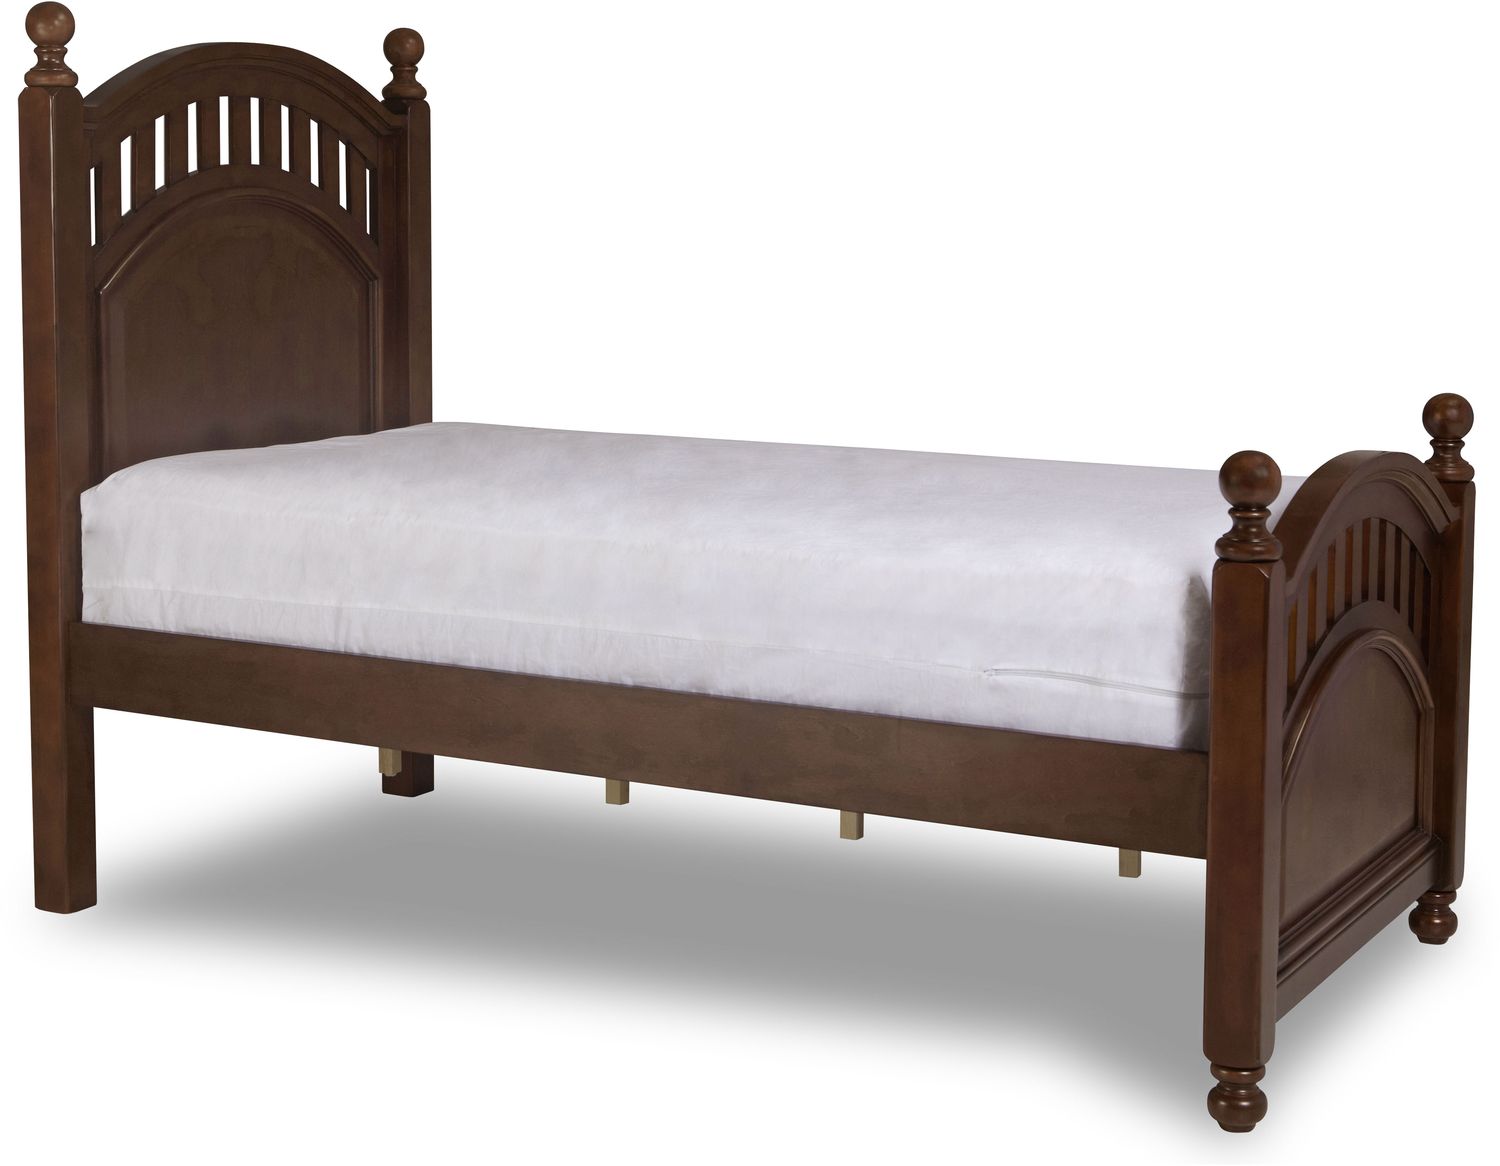 Levin Furniture Clearance English As, Levin Furniture Bed Frames